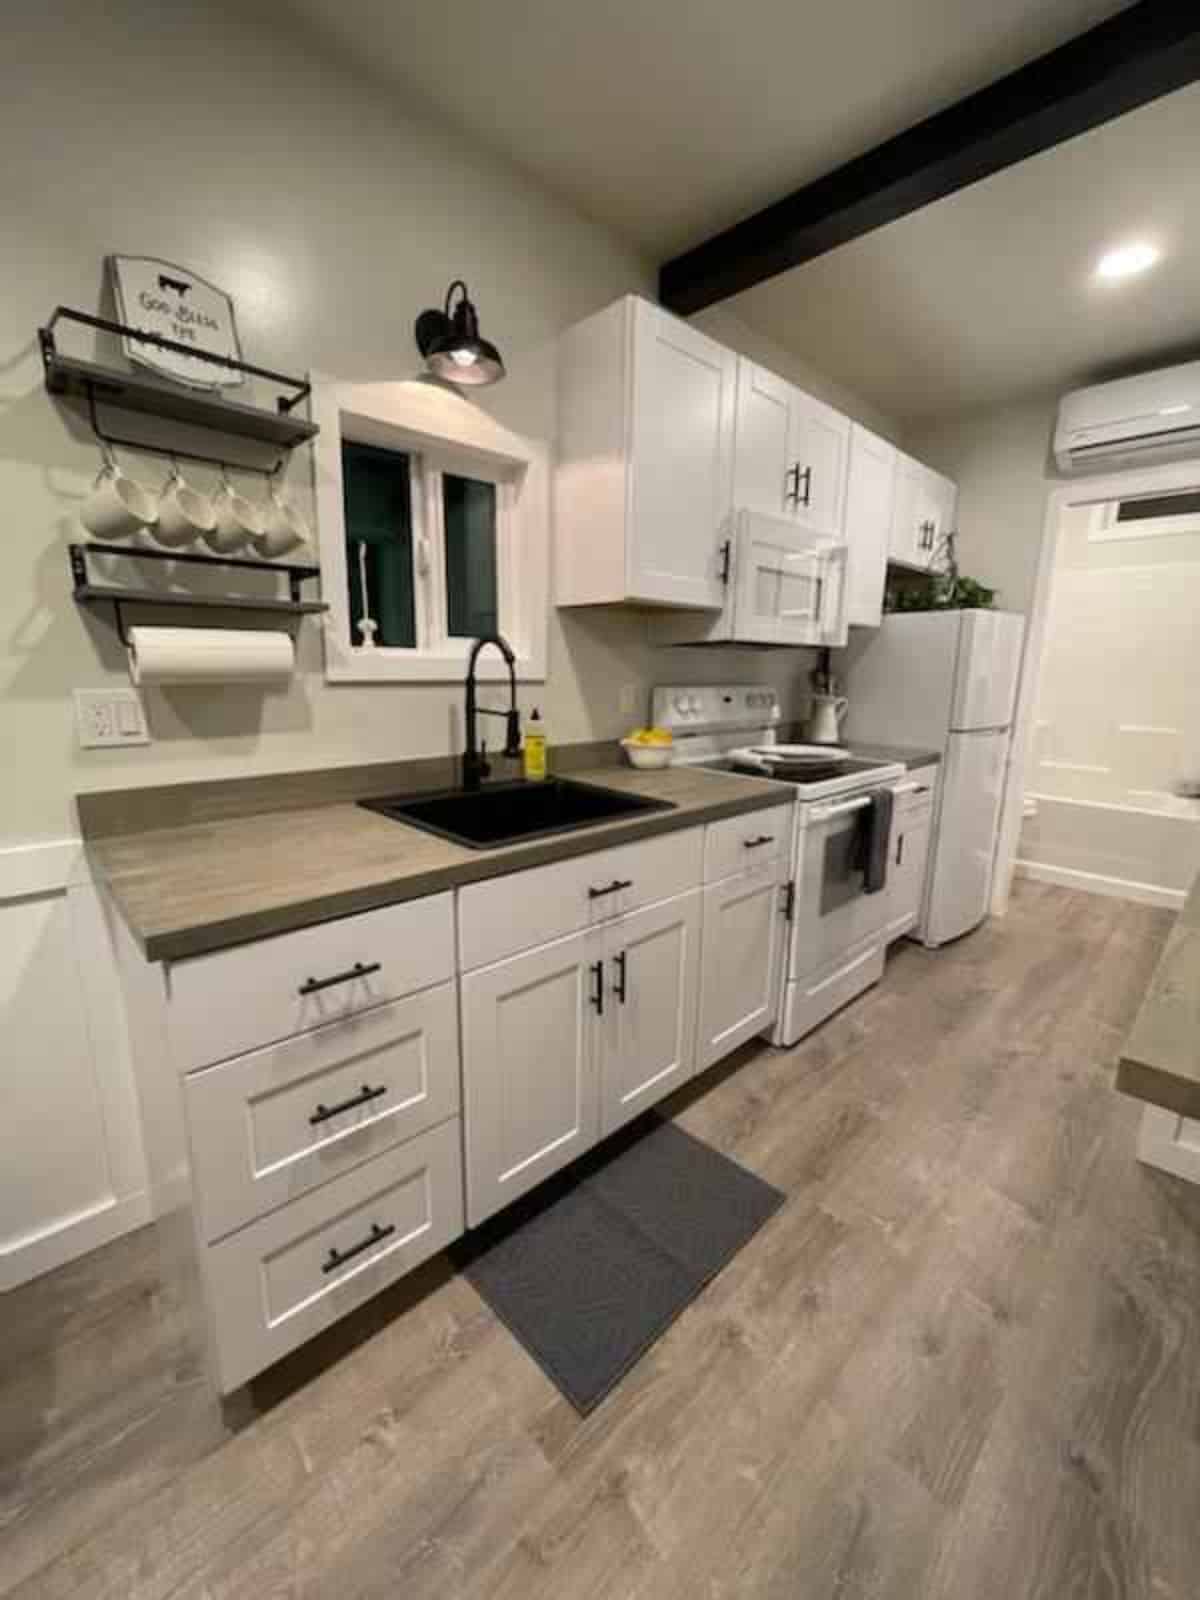 Superb kitchen area of one bed container home